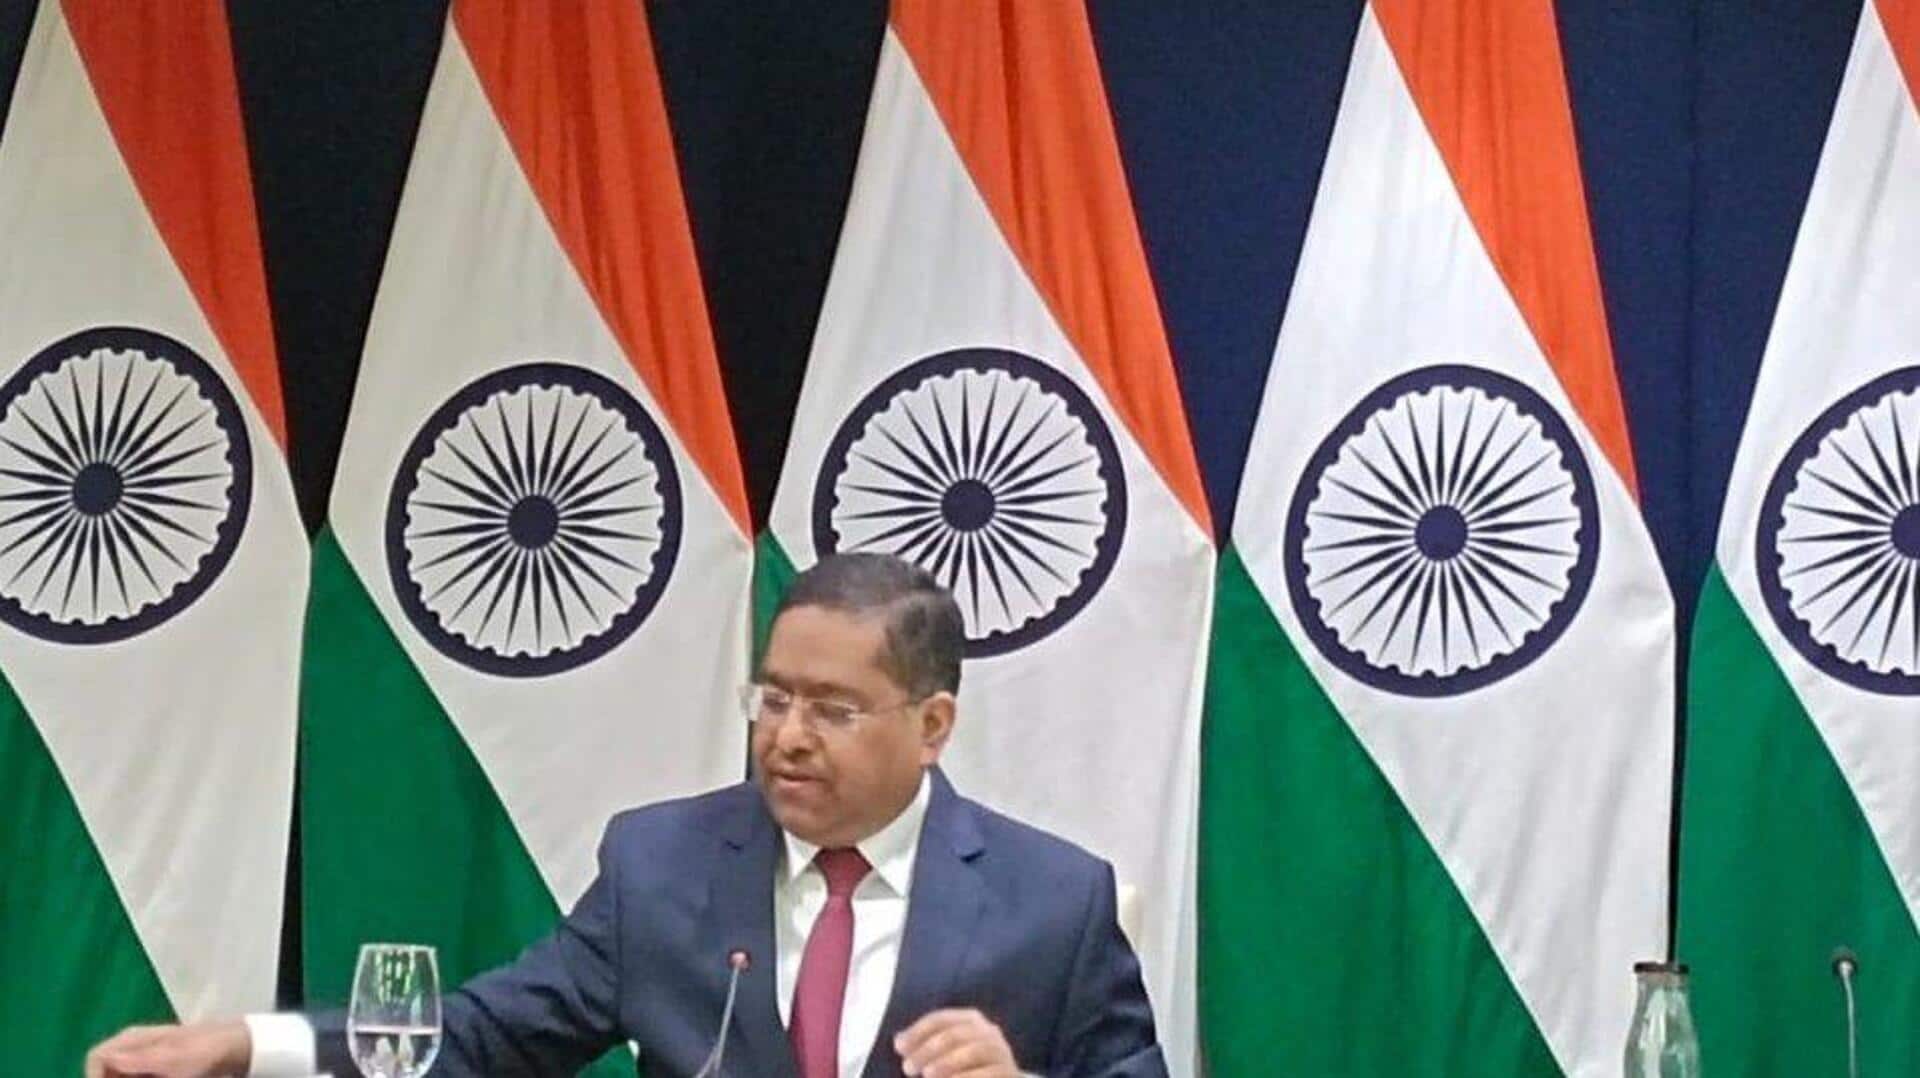 India issues second statement after US's comments on Kejriwal's arrest 